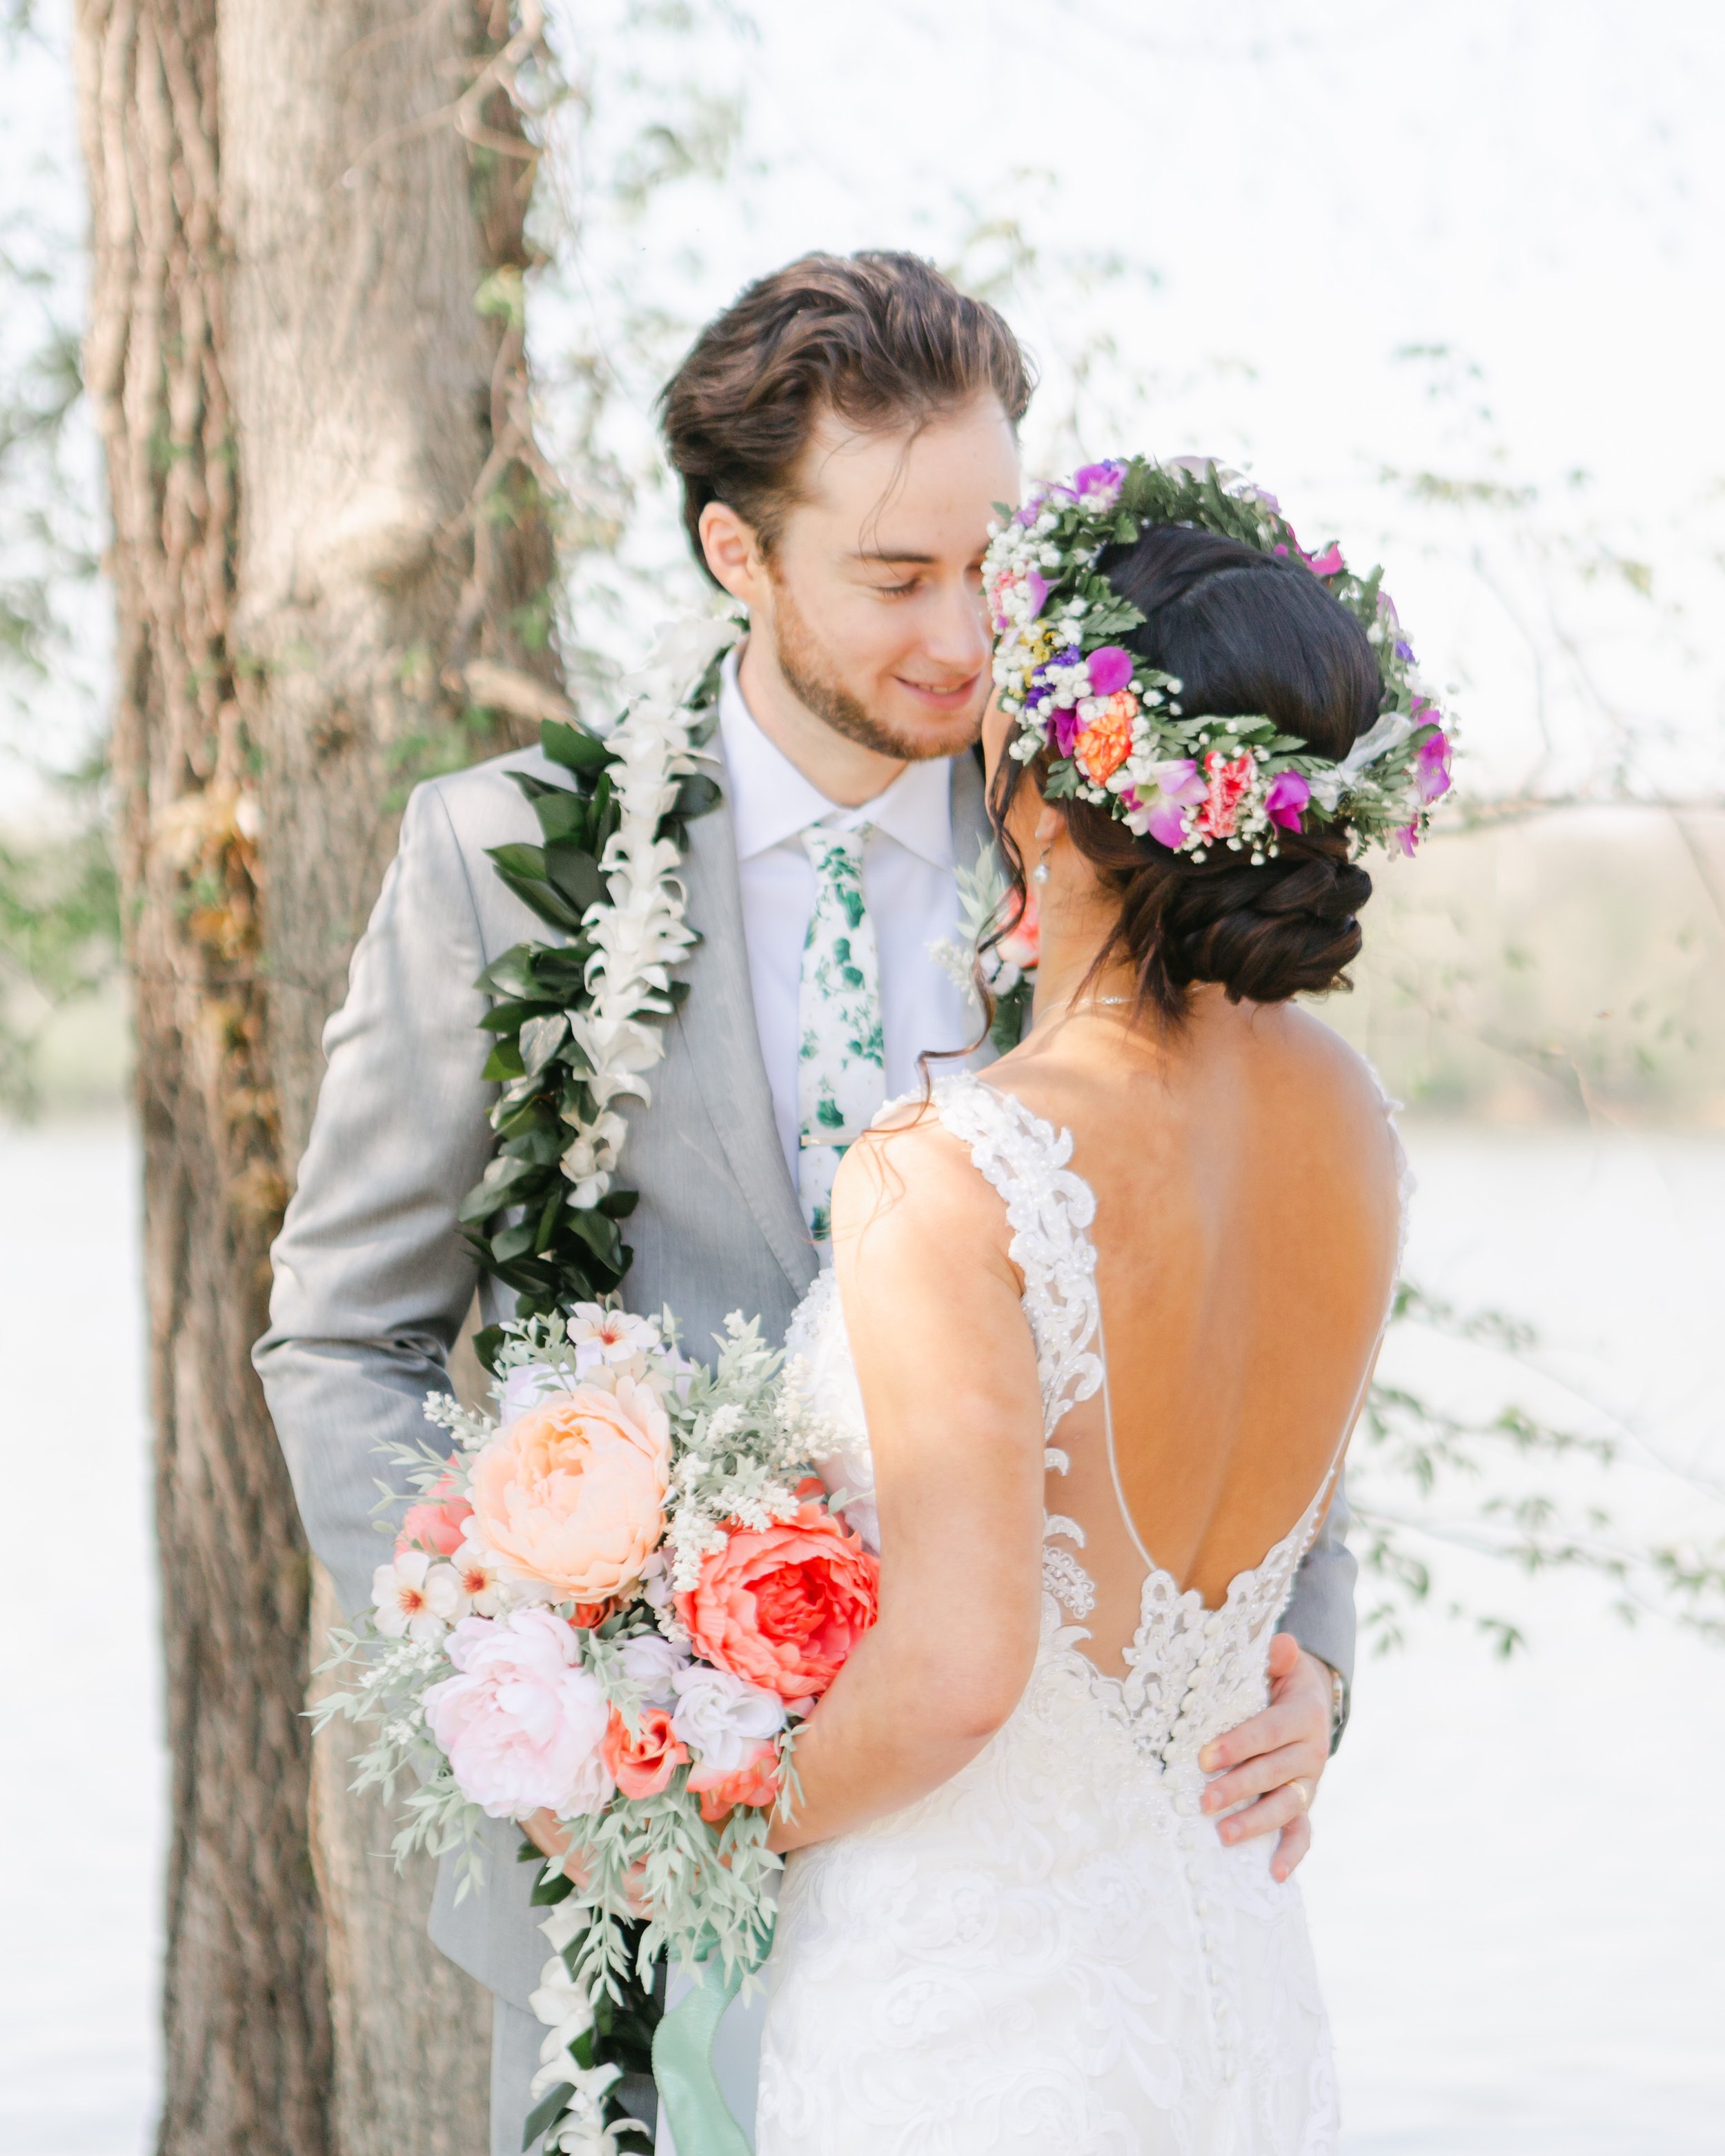 Polynesian wedding with flowers crown and bridal updo